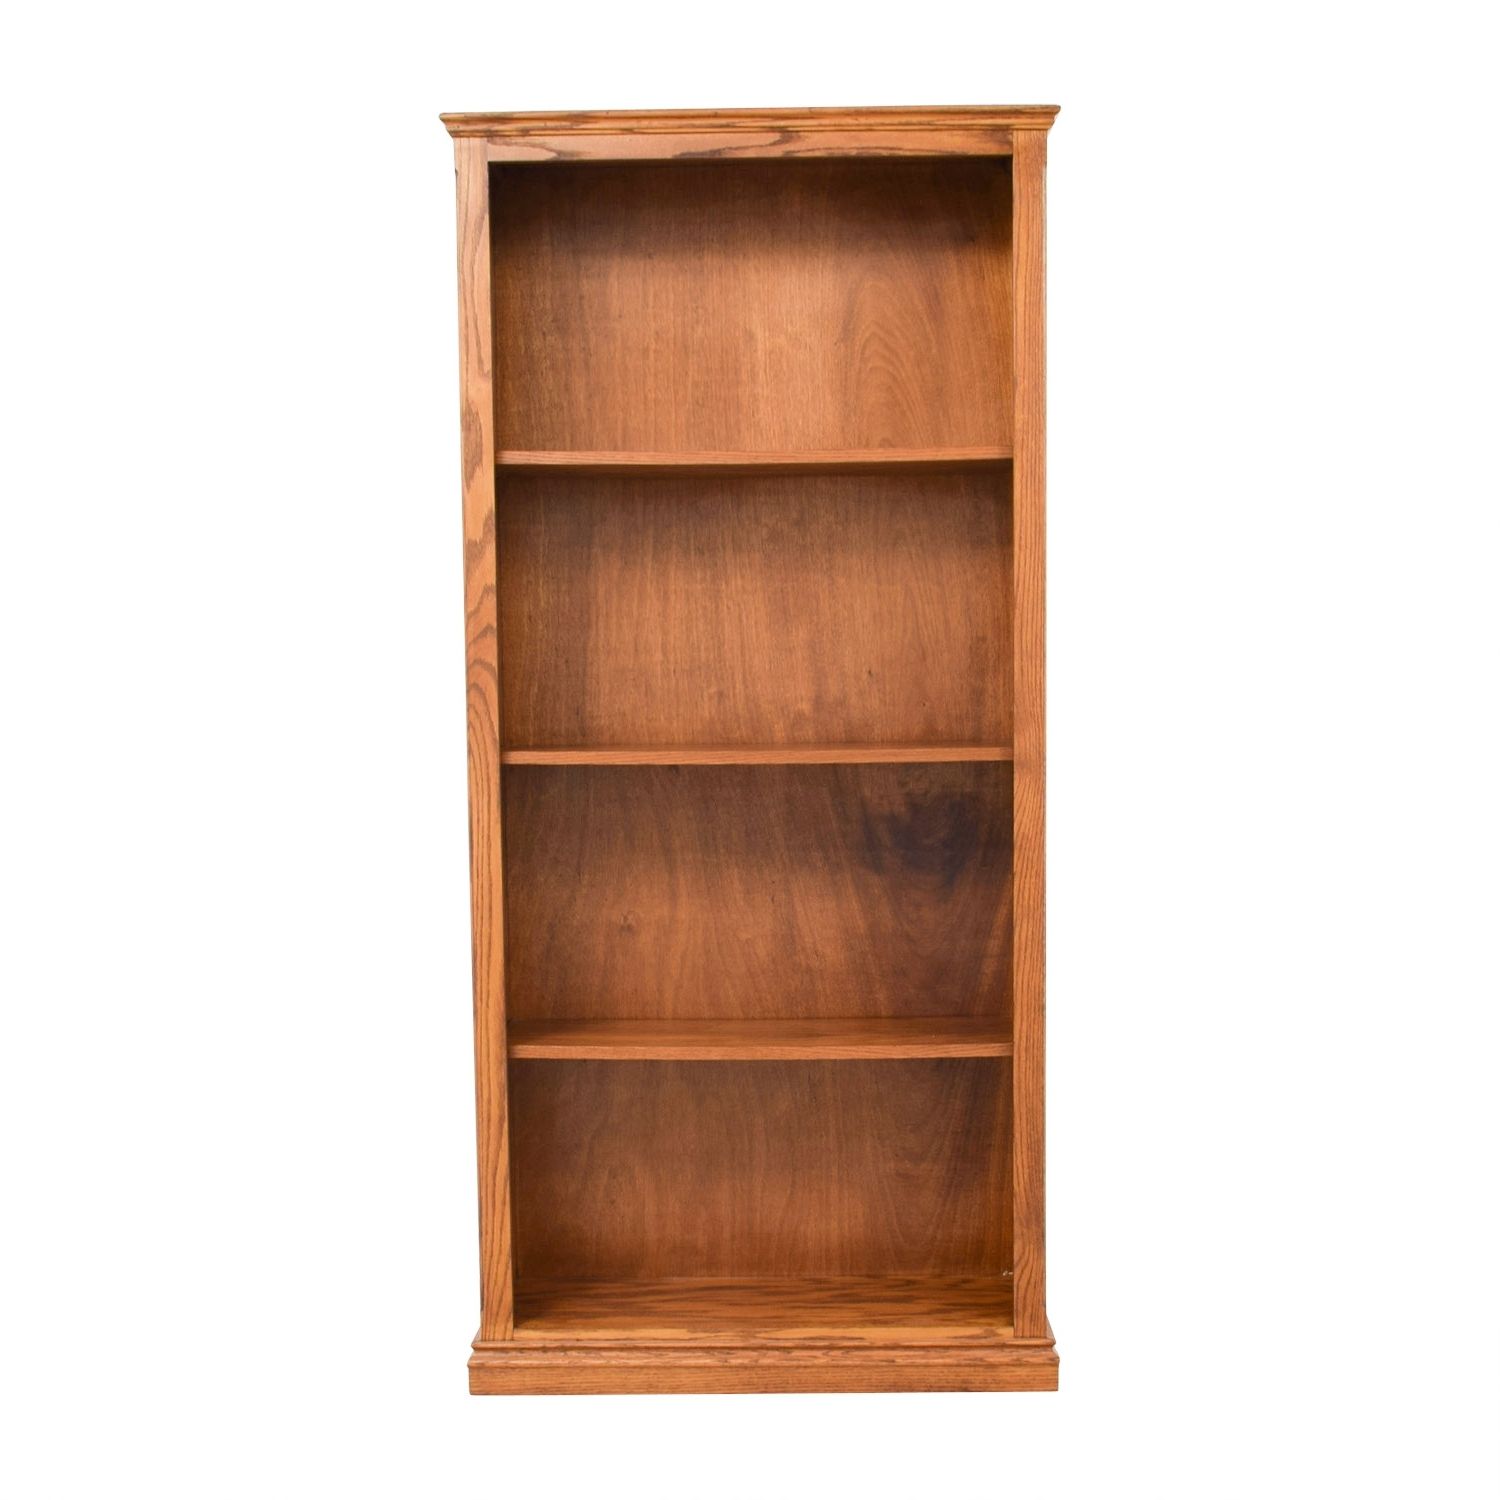 [%75% Off – Classic Wooden Bookshelf / Storage With Regard To Best And Newest Classic Bookcases|classic Bookcases Intended For Popular 75% Off – Classic Wooden Bookshelf / Storage|recent Classic Bookcases For 75% Off – Classic Wooden Bookshelf / Storage|most Current 75% Off – Classic Wooden Bookshelf / Storage In Classic Bookcases%] (View 3 of 15)